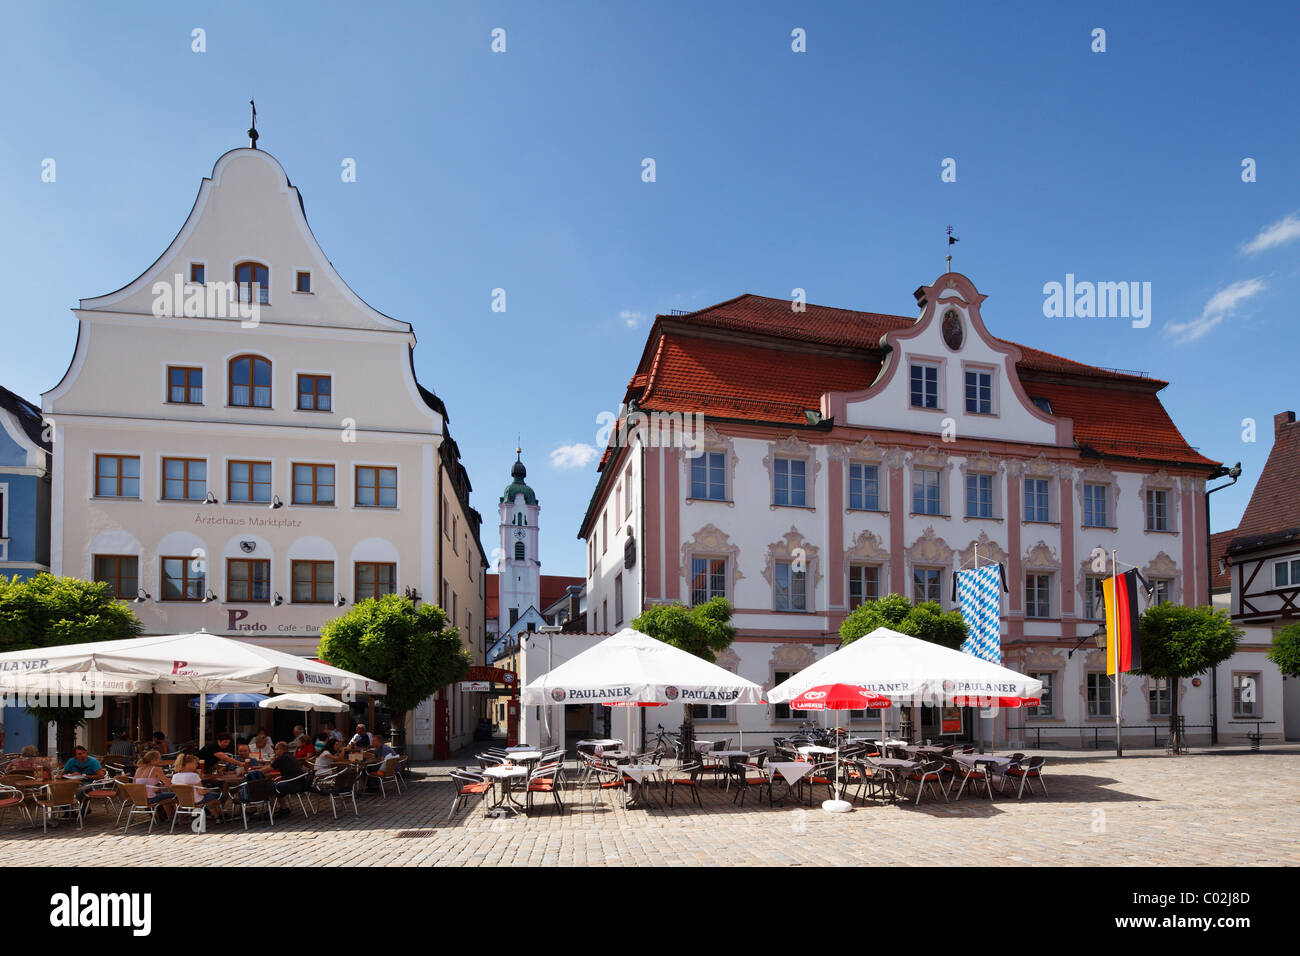 Marketplace with Frauenkirche Church of Our Lady and Brentanohaus building, Guenzburg, Donauried region, Swabia, Bavaria Stock Photo